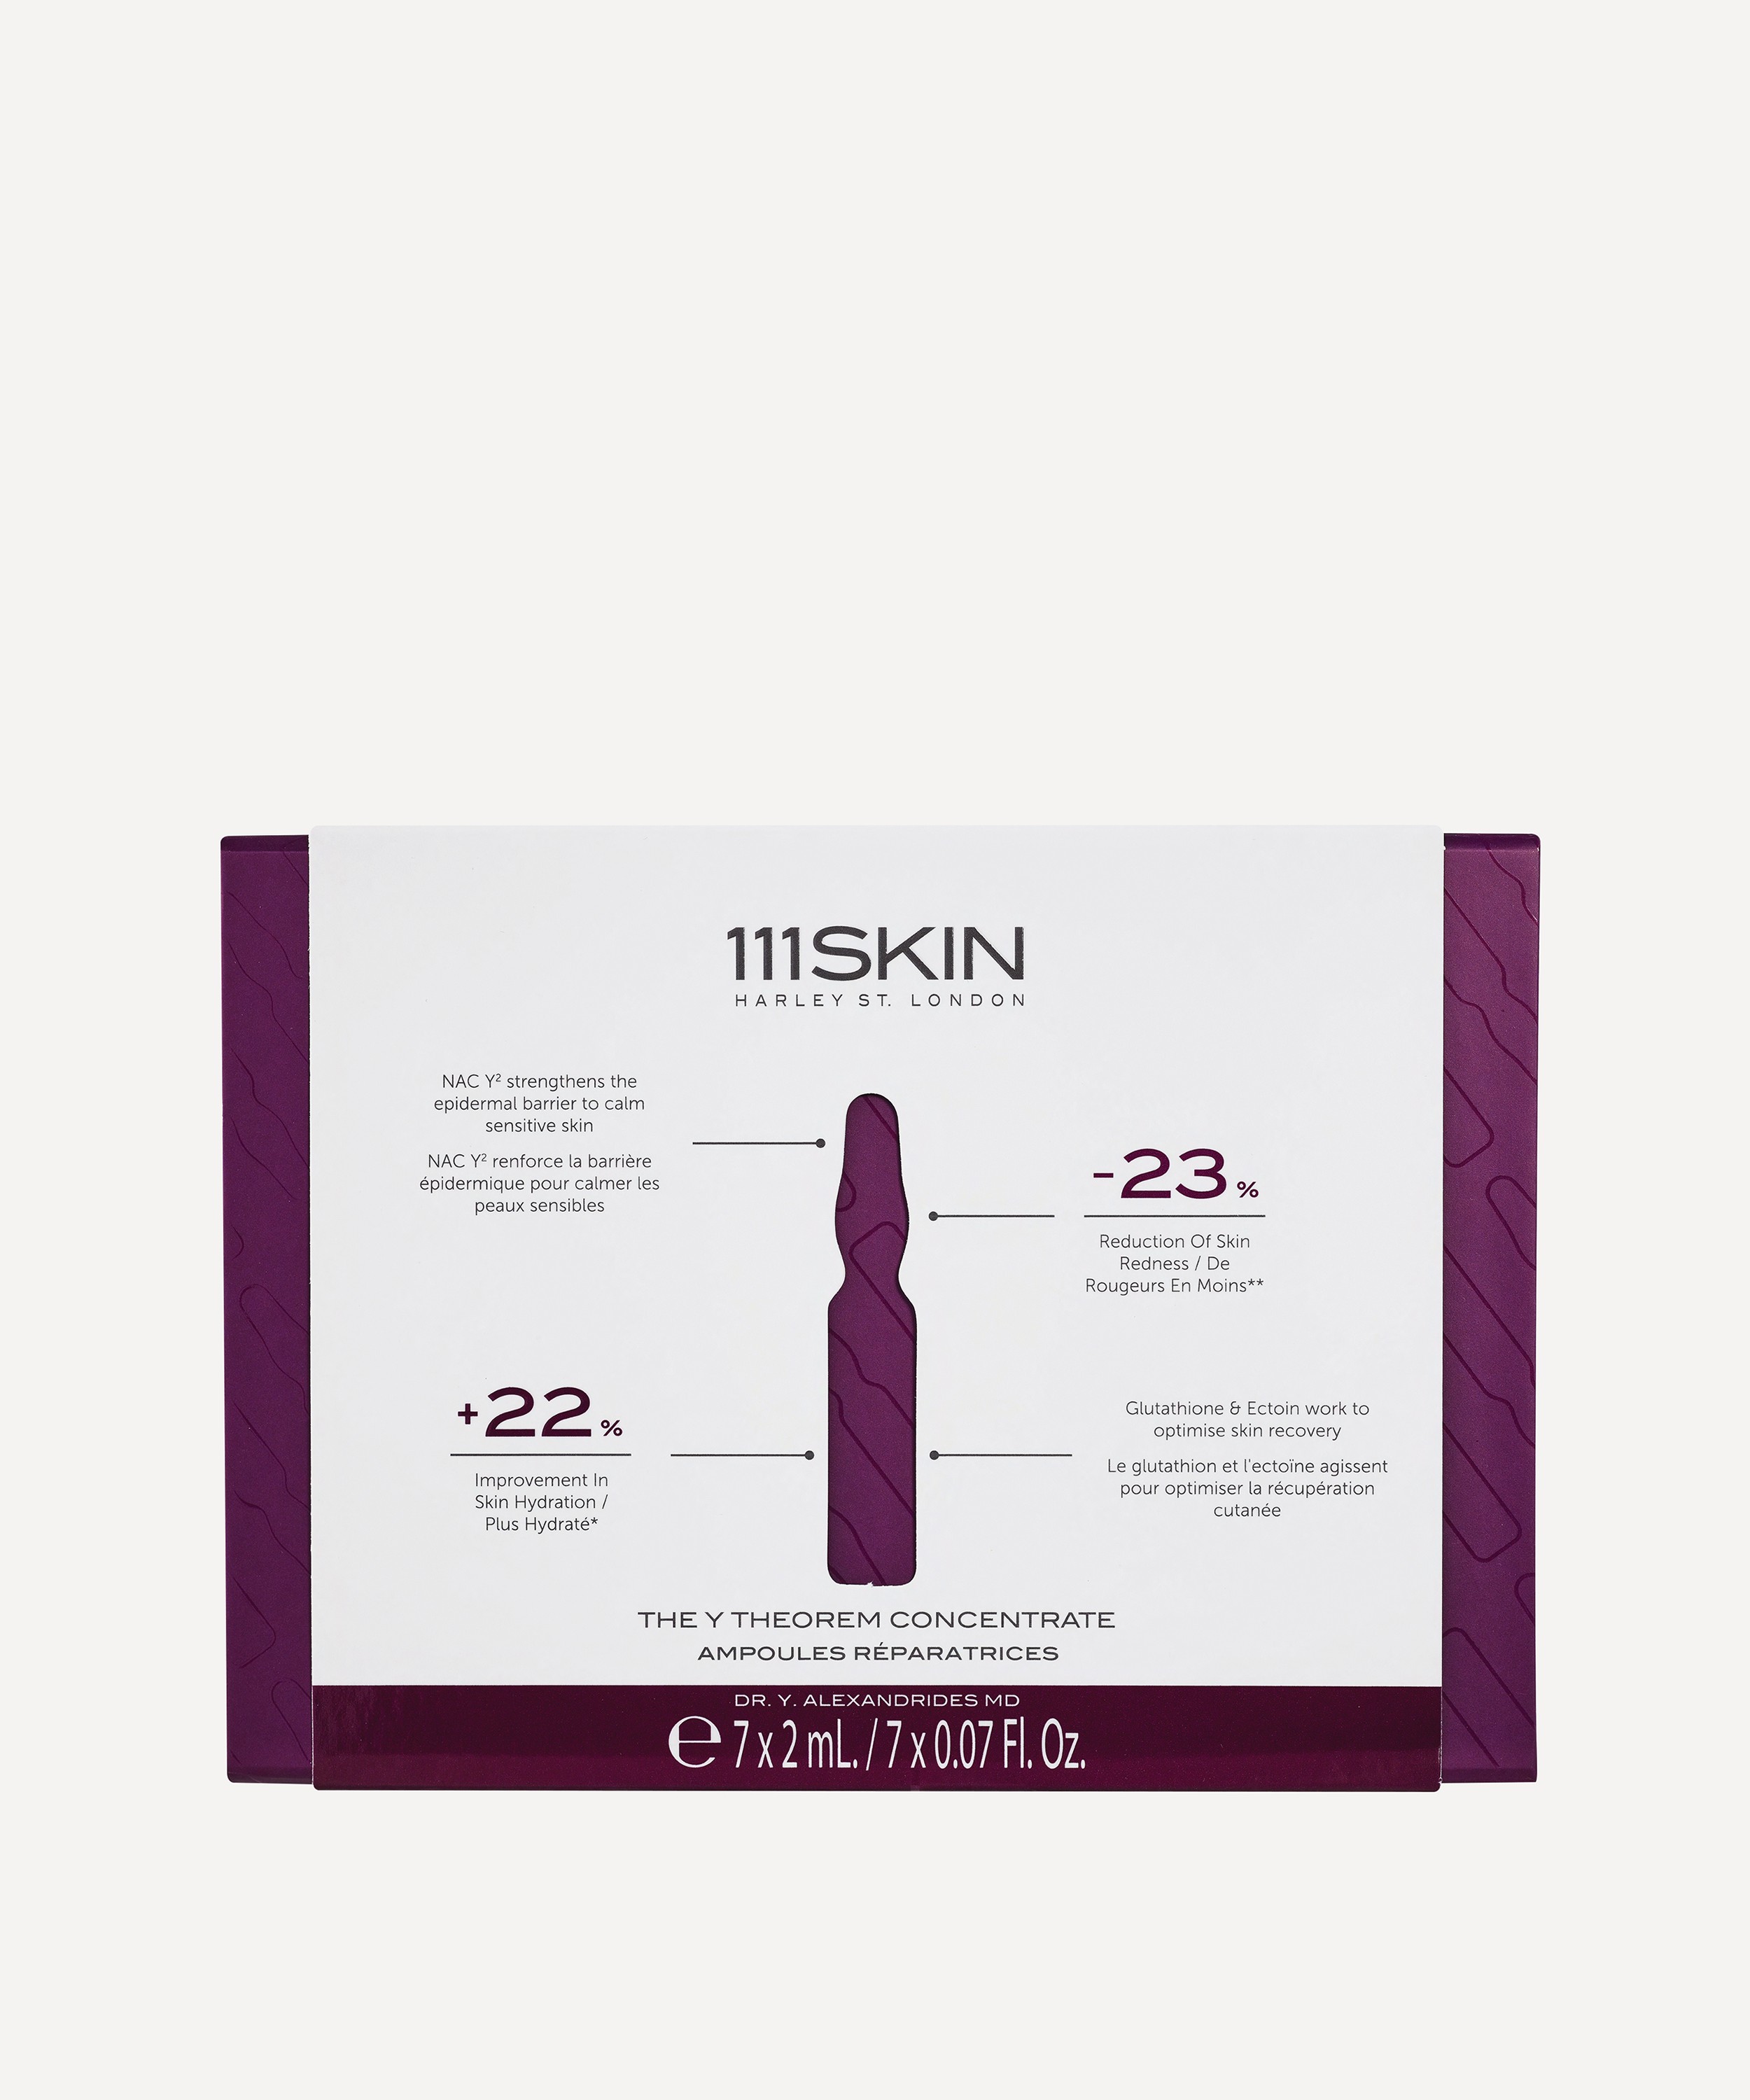 111SKIN - The Y Theorem Concentrate 7 x 2ml